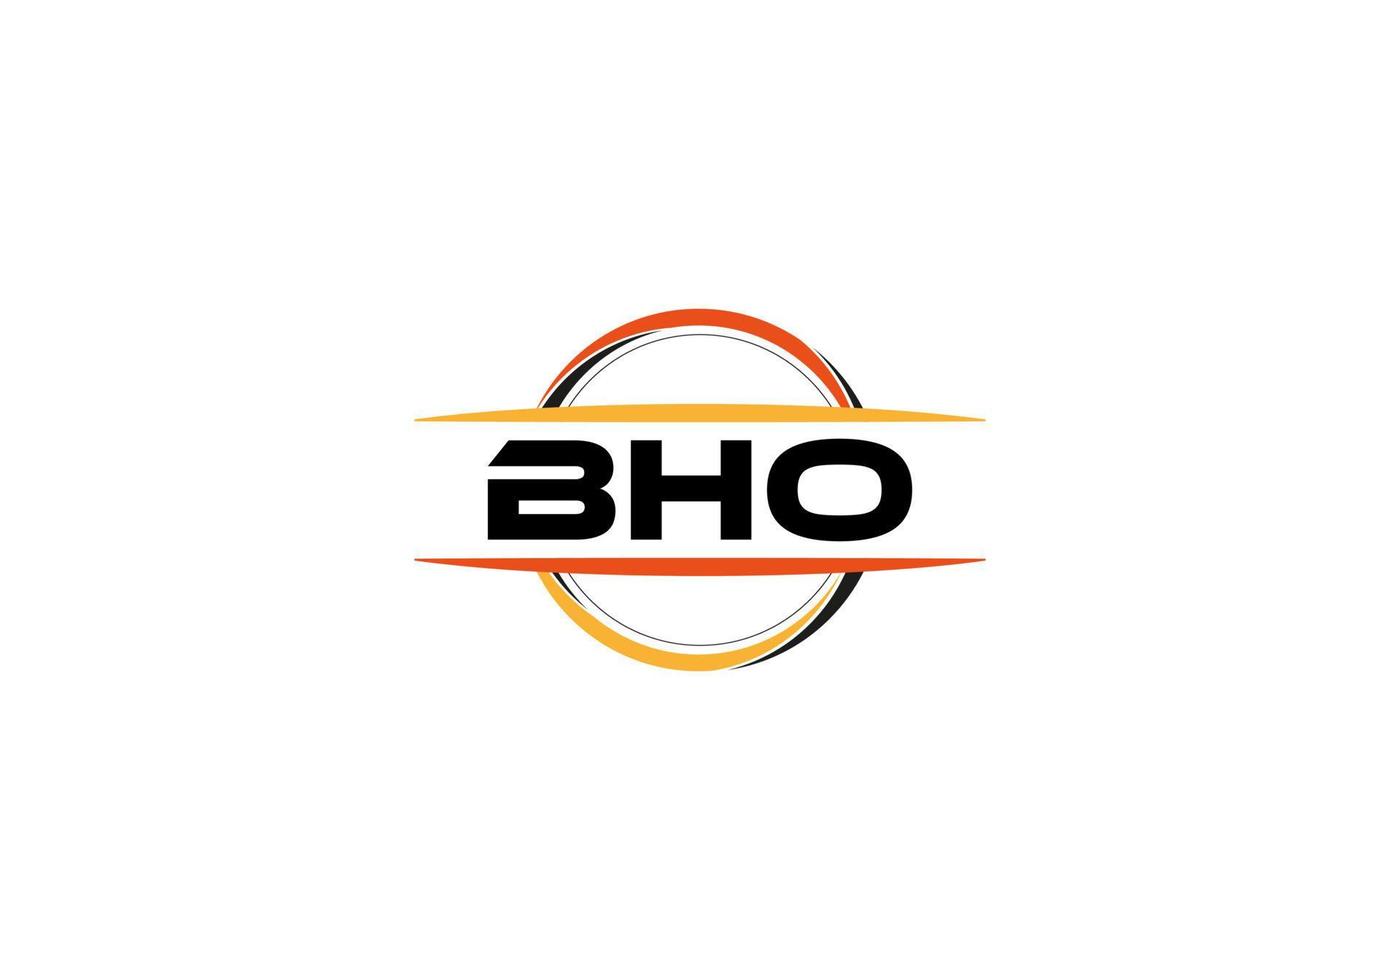 BHO letter royalty ellipse shape logo. BHO brush art logo. BHO logo for a company, business, and commercial use. vector